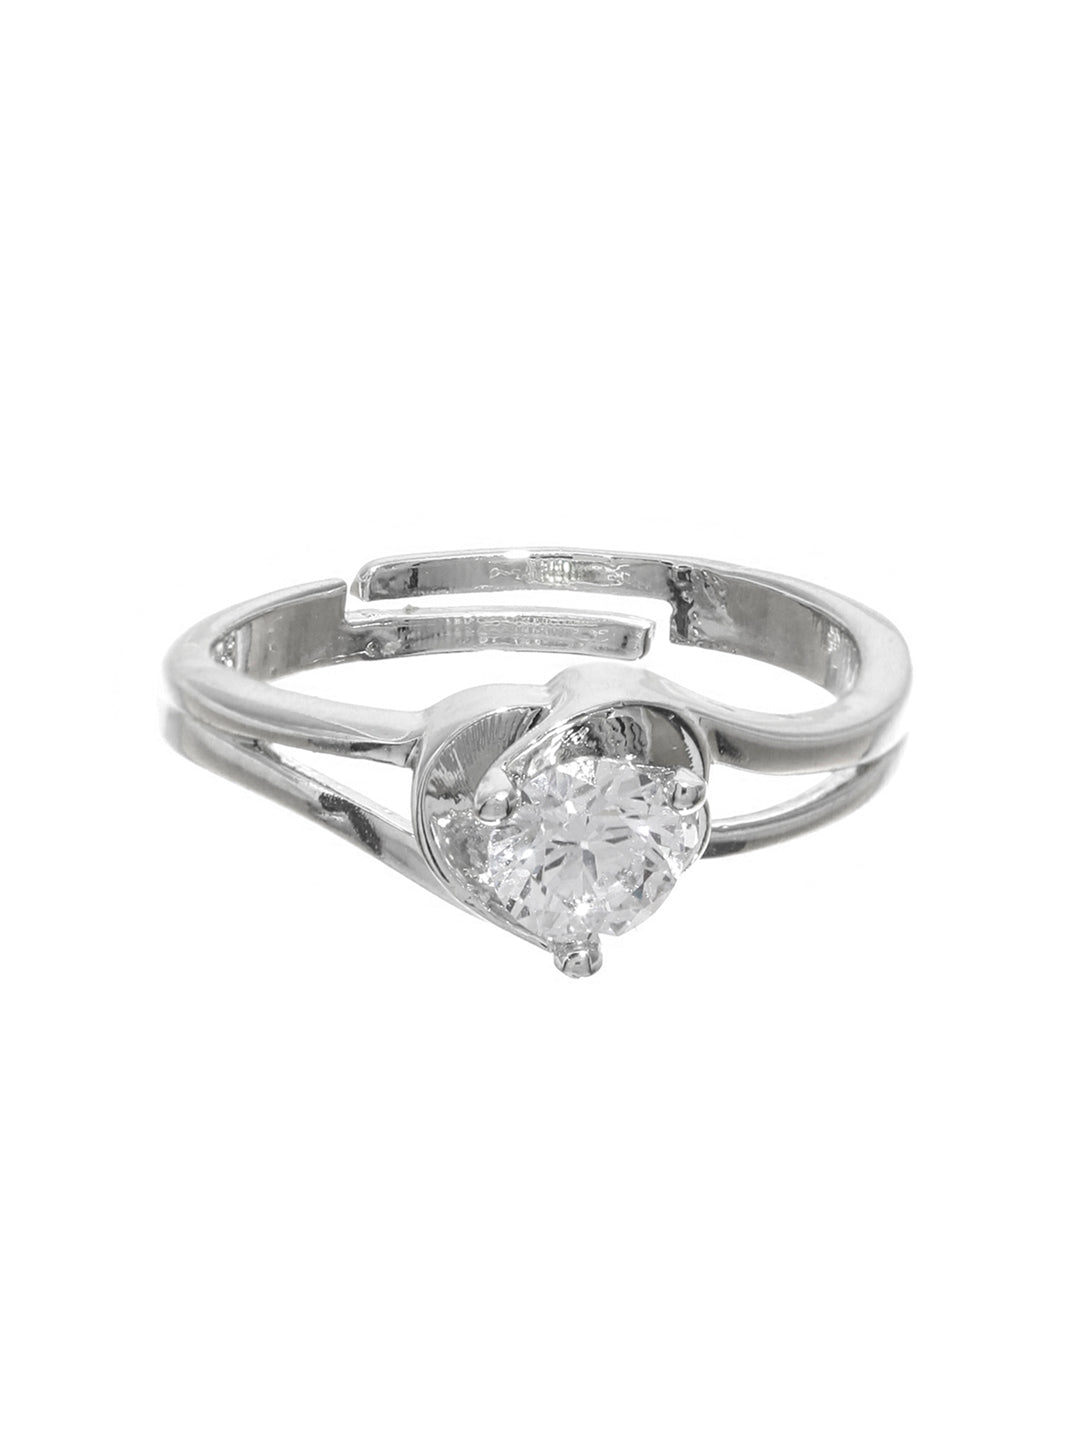 Cubic Zirconia Solitaire Silver Ring